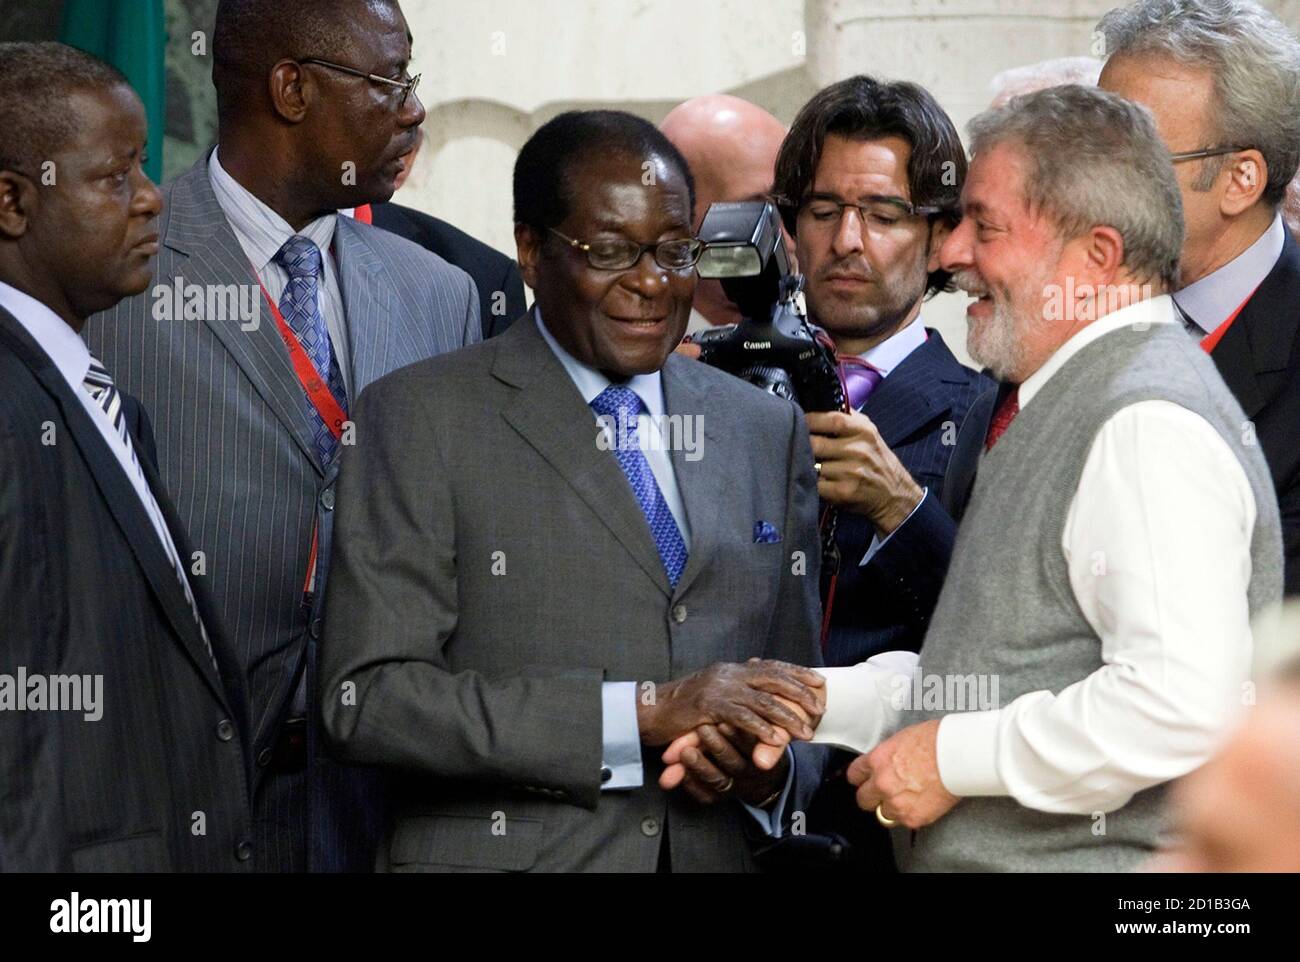 Brazil's President Luiz Inacio Lula da Silva (R) greets Zimbabwe's President Robert Mugabe (3rd L) during a food summit of Latin American and African heads of state in Rome November 15, 2009. World leaders and government officials will meet in Rome on Monday for a three-day U.N. World Food Summit on Food Security. REUTERS/Alessandro Bianchi  (ITALY POLITICS FOOD) Stock Photo